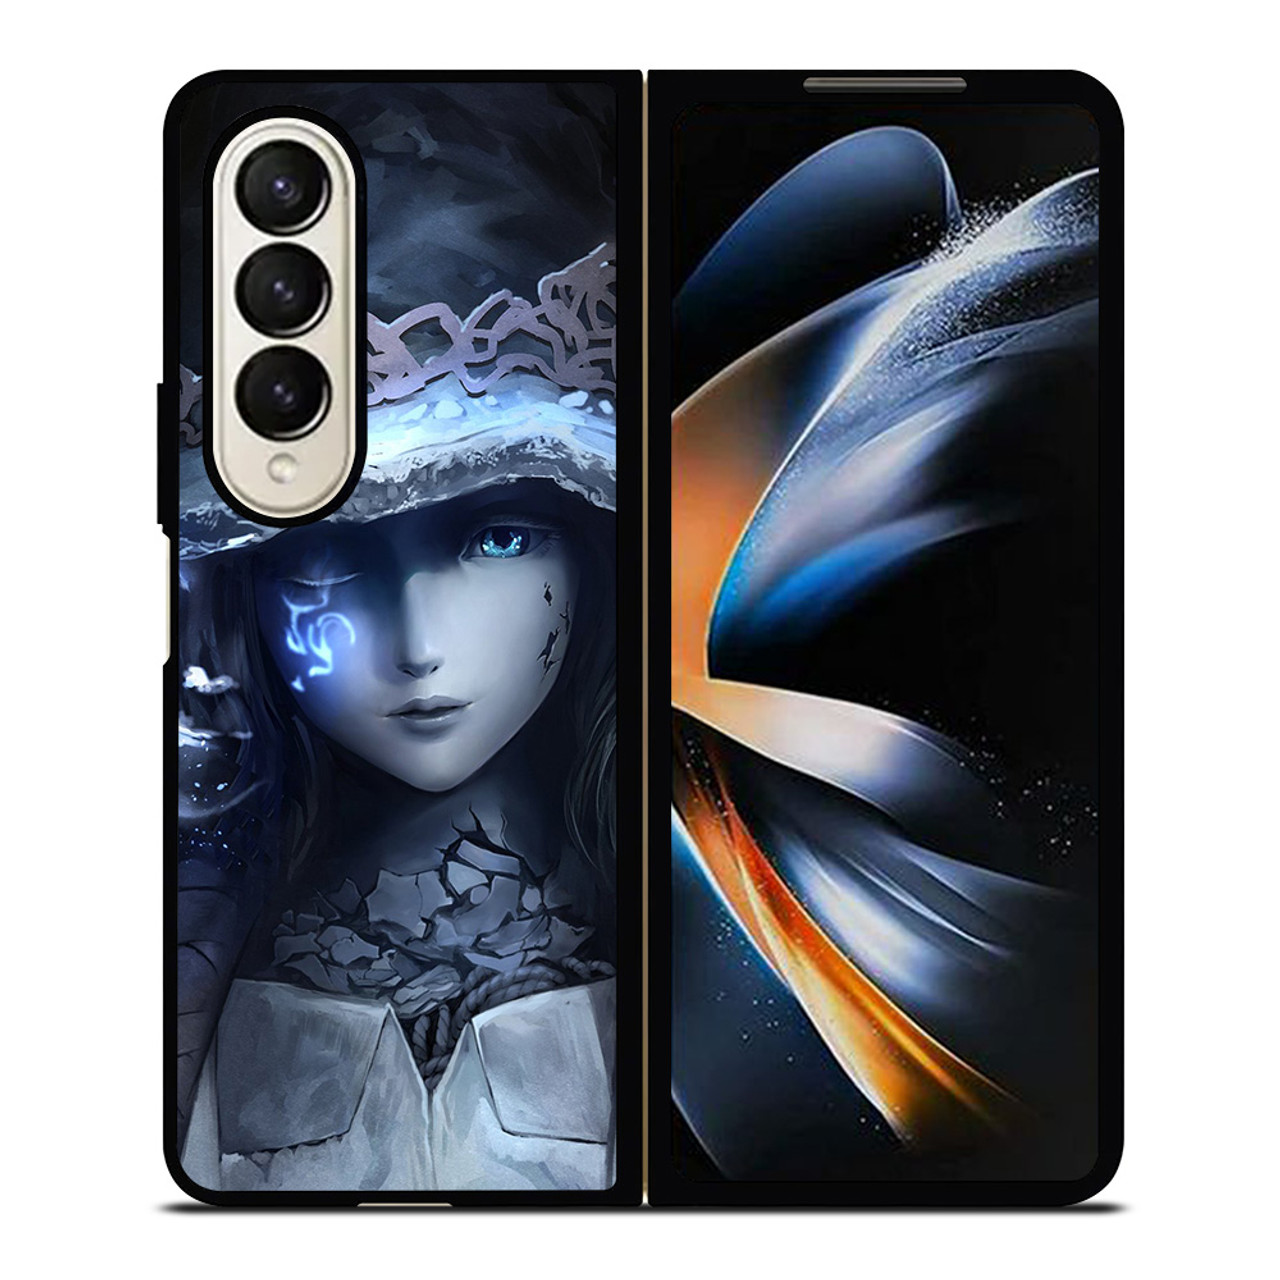 RANNI THE WITCH ELDEN RING Samsung Galaxy Z Fold 4 Case Cover